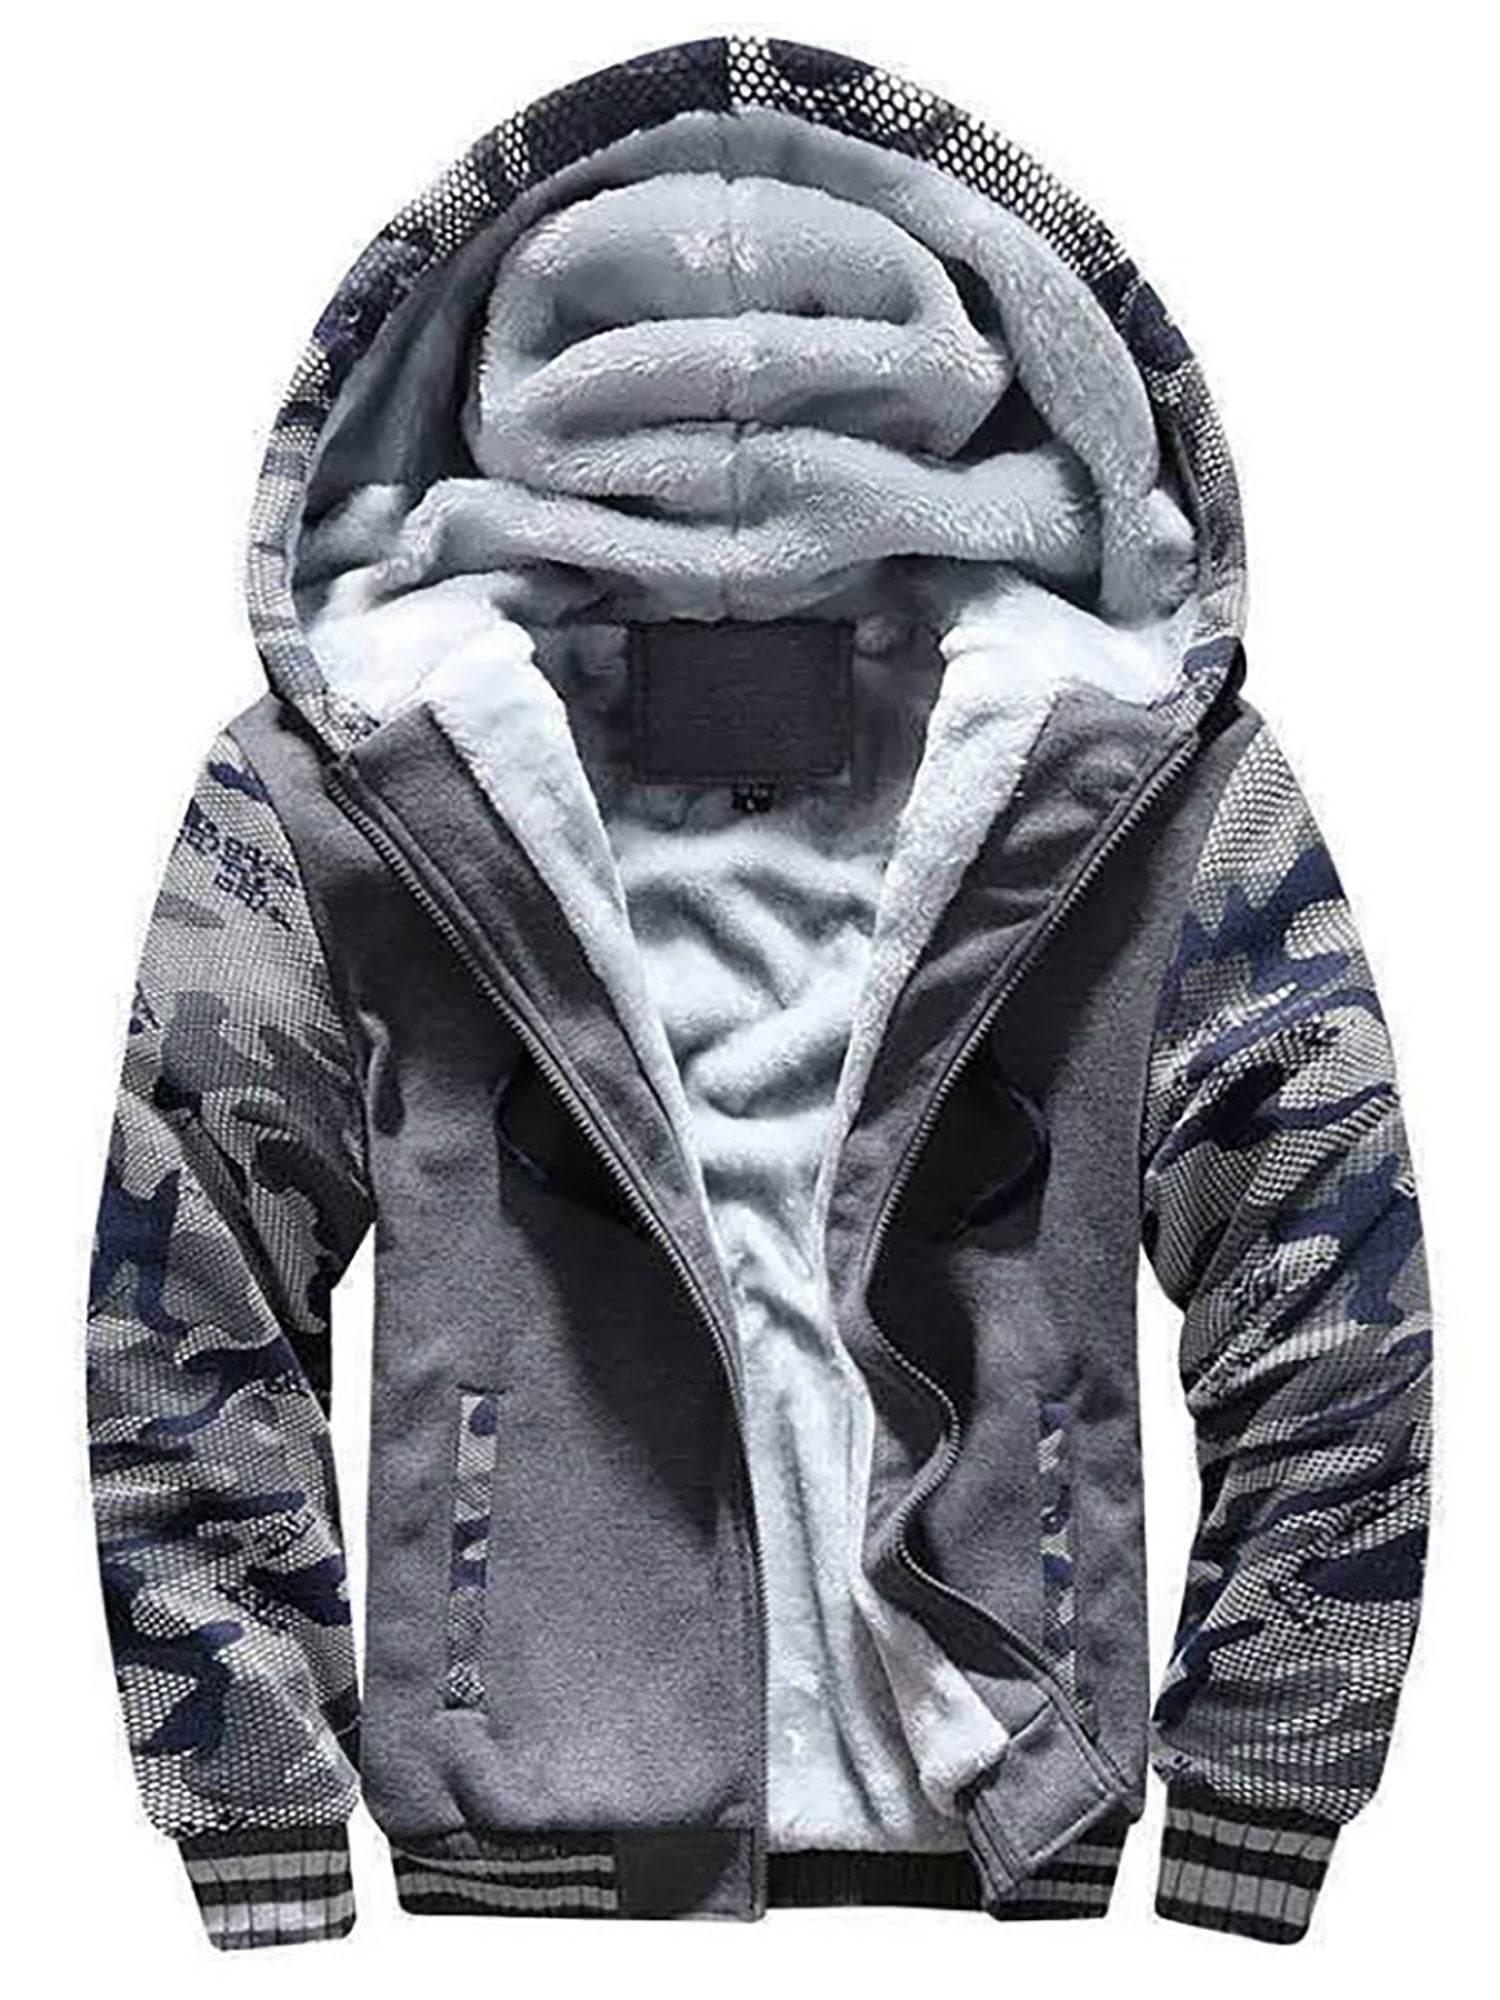 BOONEE Zipped Fishing V.e.s.p.a Hoodie, Breathable Men Jacket with Hood,  Comfort Midweight Hoody for Adult Running-Grey